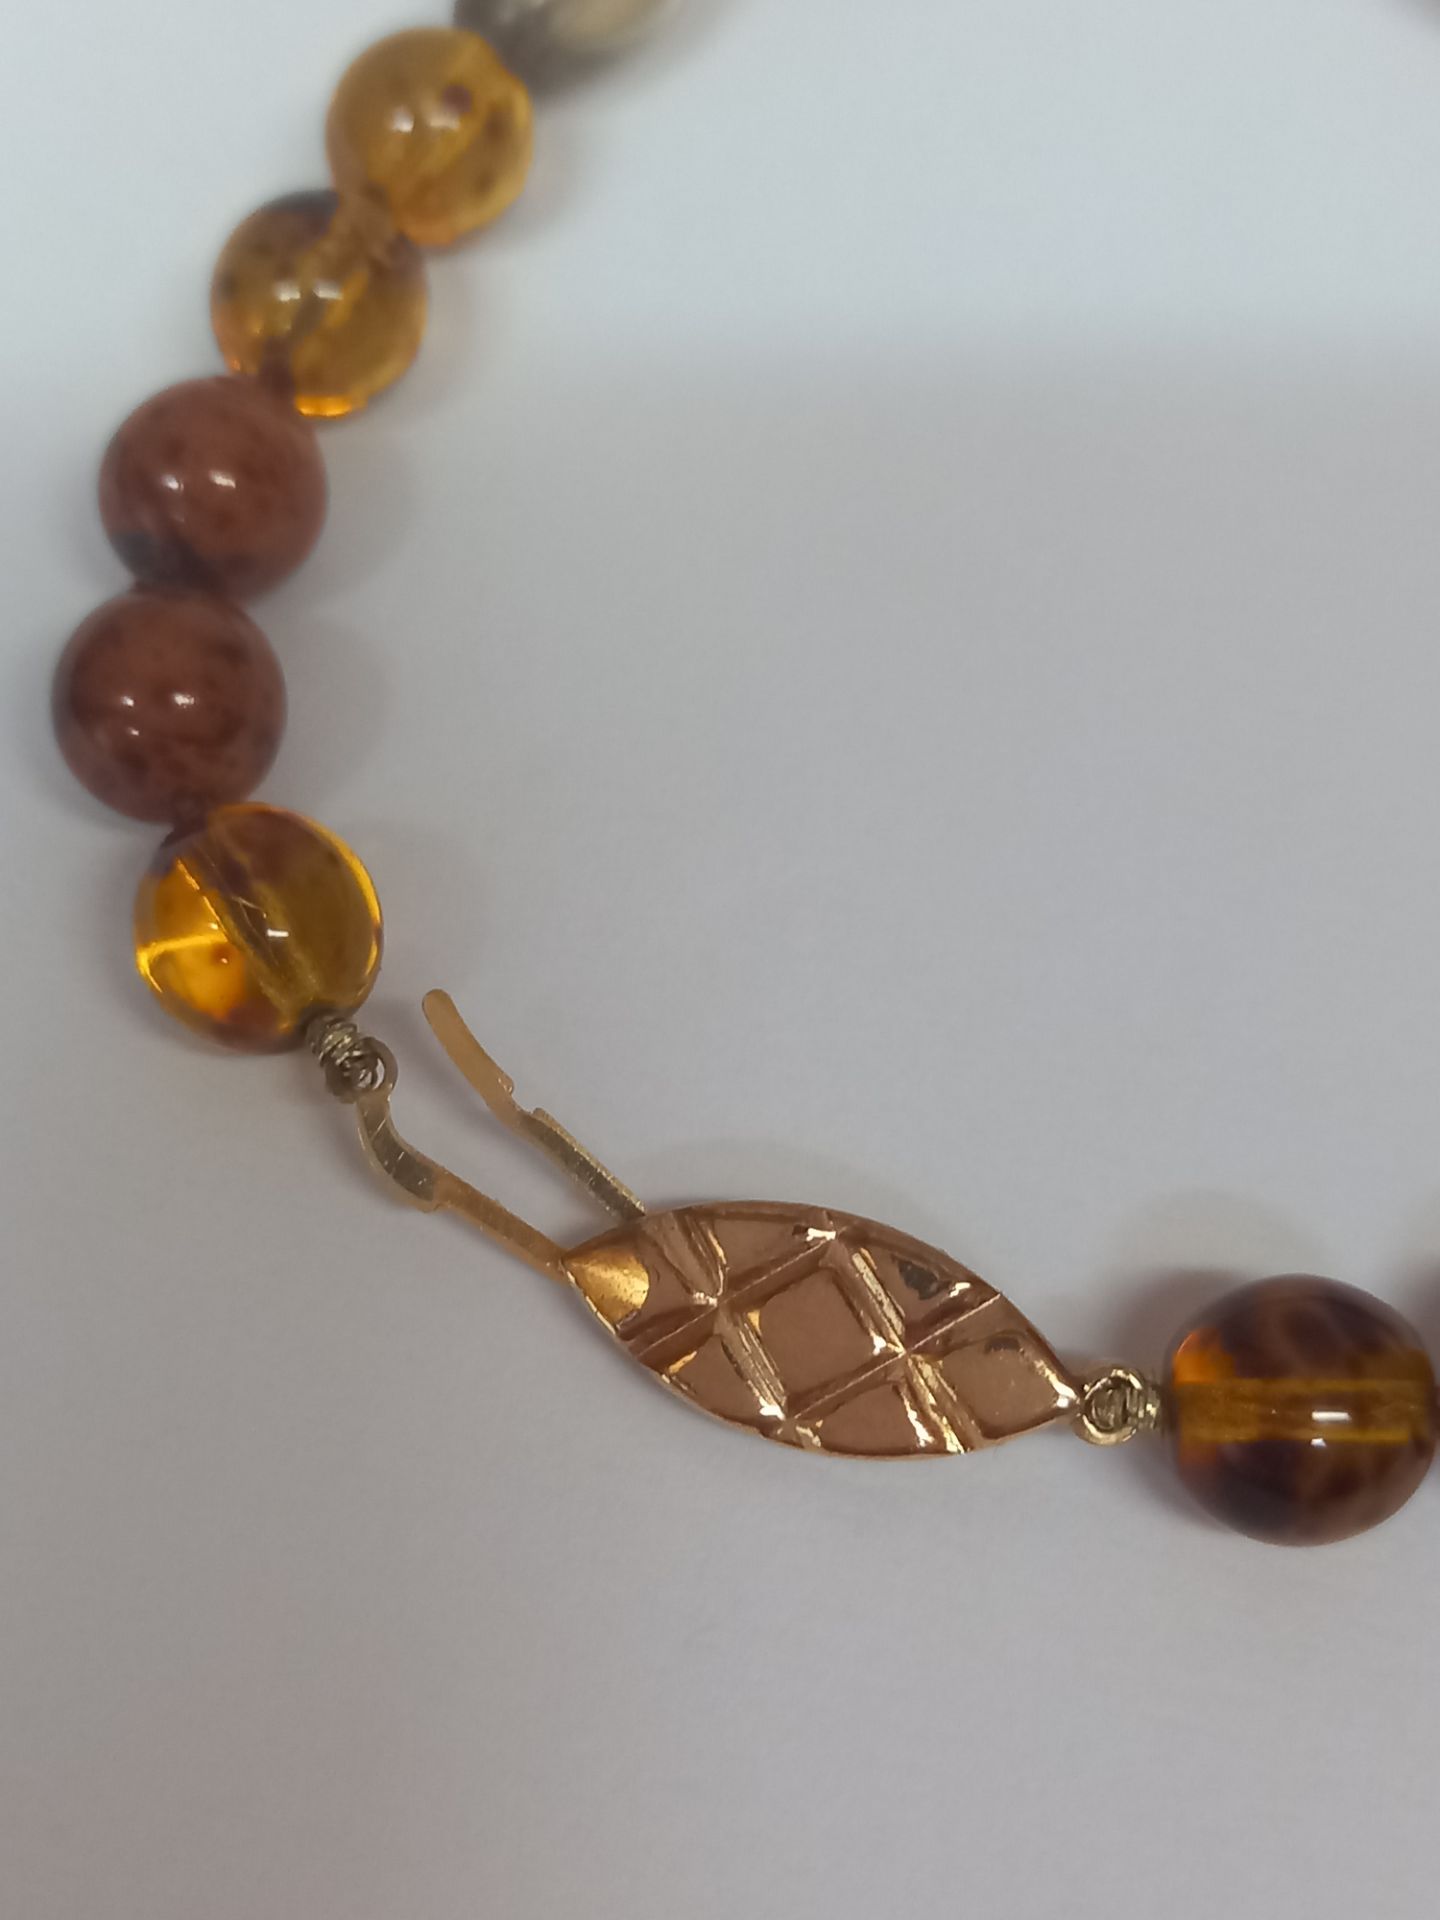 BALTIC KNOTTED AMBER NECKLACE - Image 4 of 6